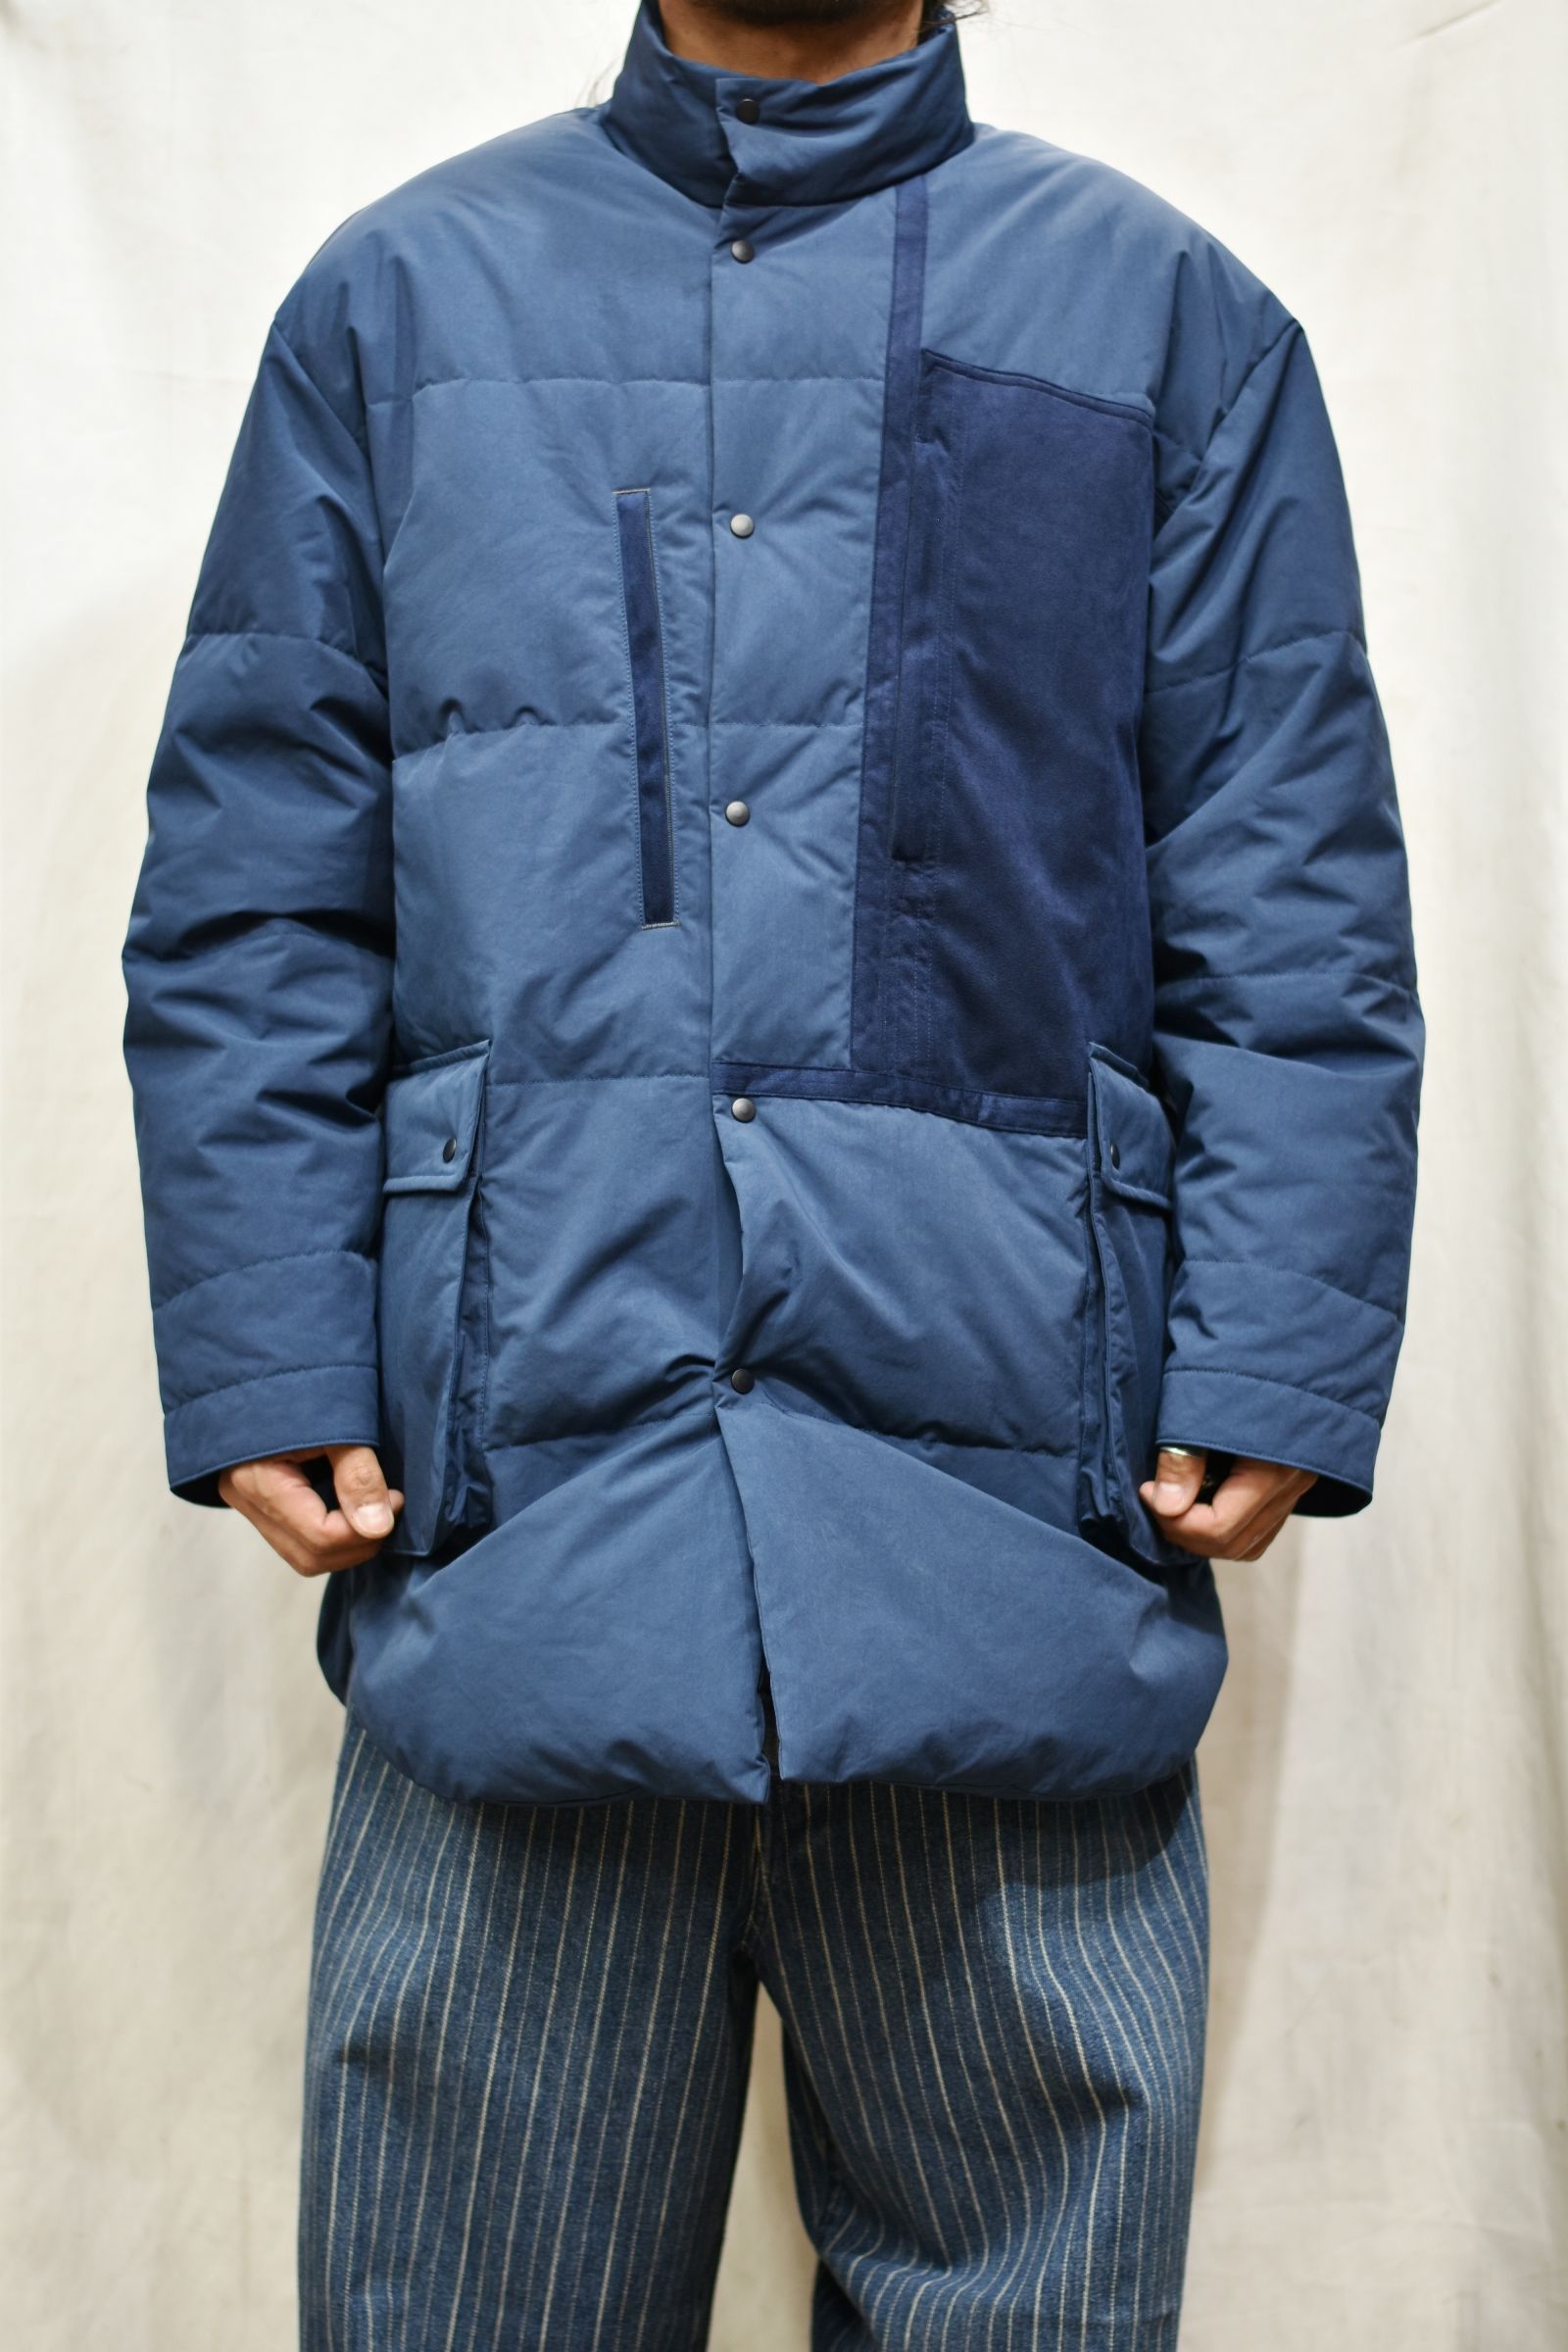 Porter Classic - WEATHER DOWN SHIRT JACKET -NAVY- | chord ...